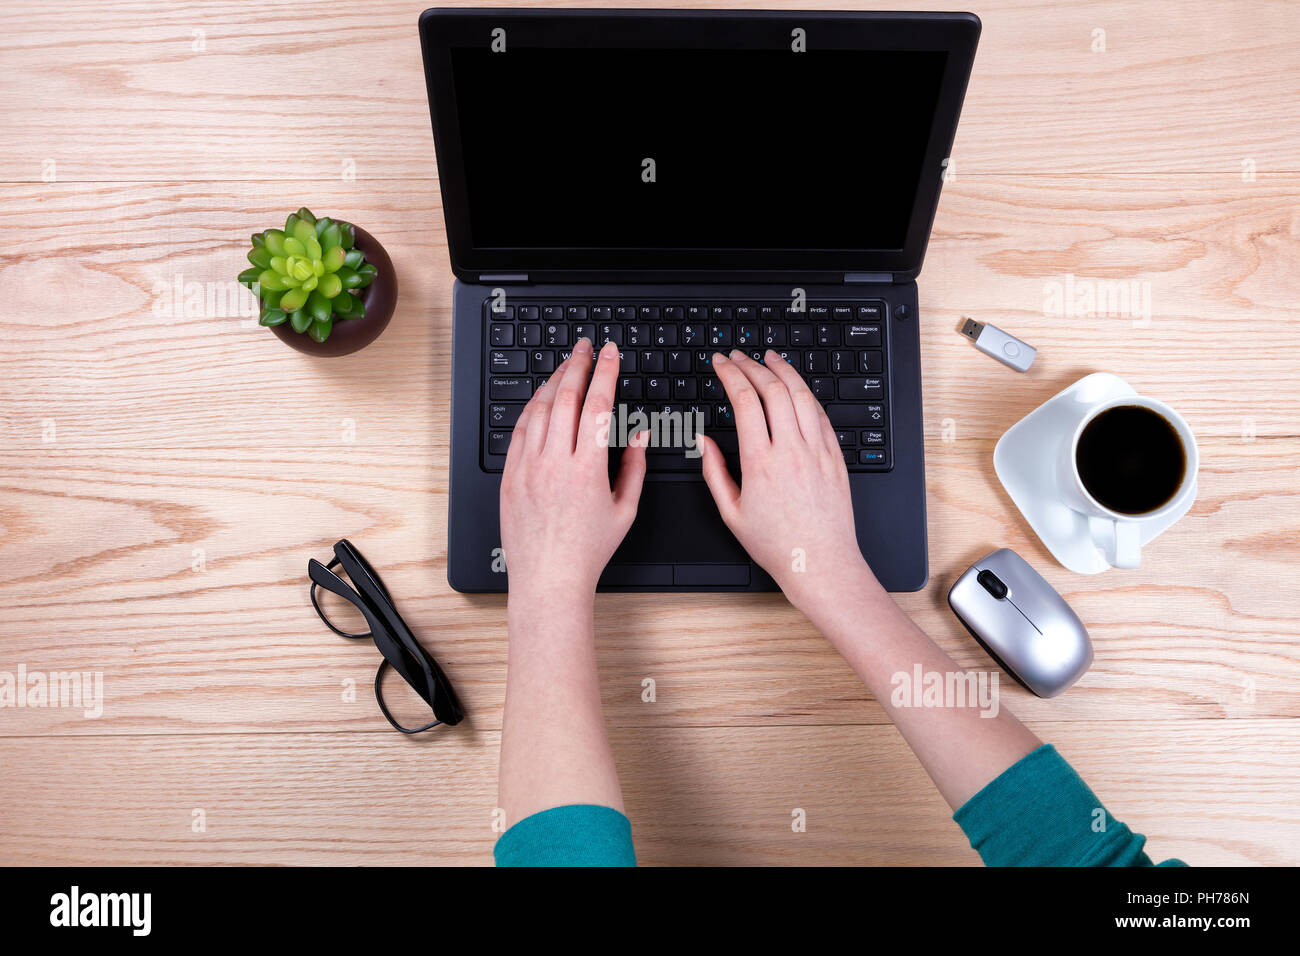 Office desktop setup with female hands working on laptop keyboard Stock Photo